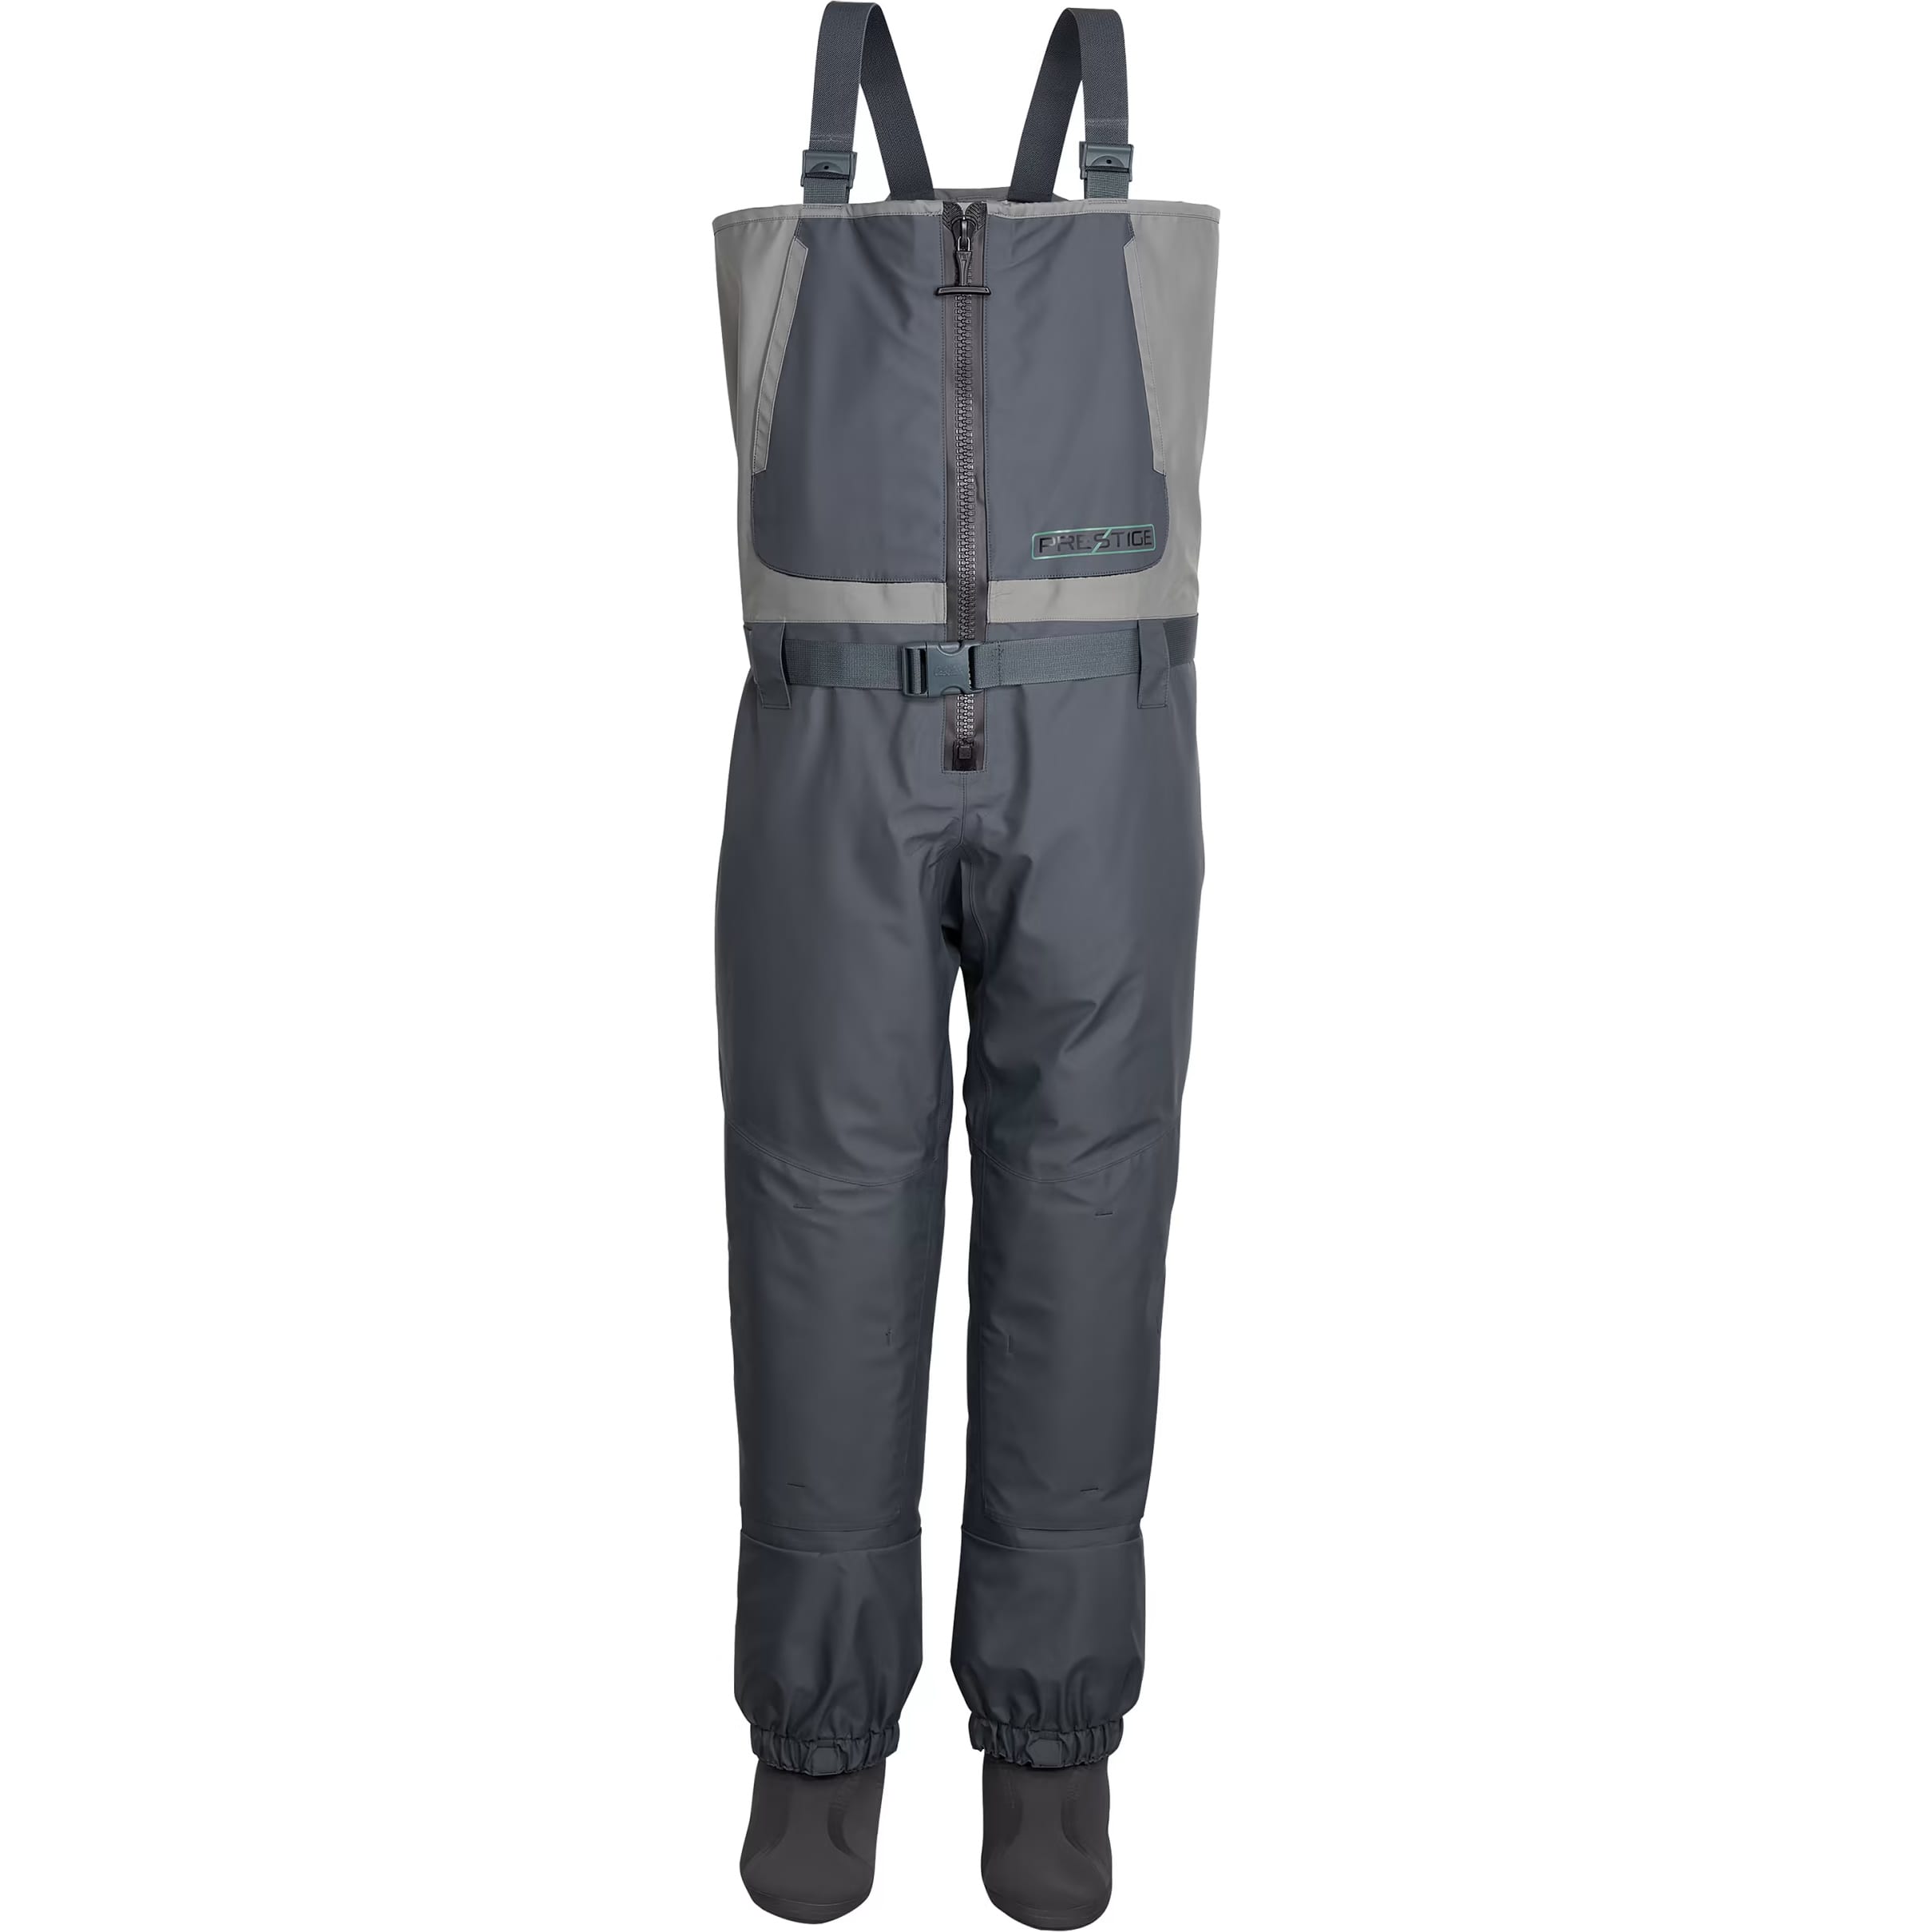 Fly Fishing Chest Waders Breathable Stocking